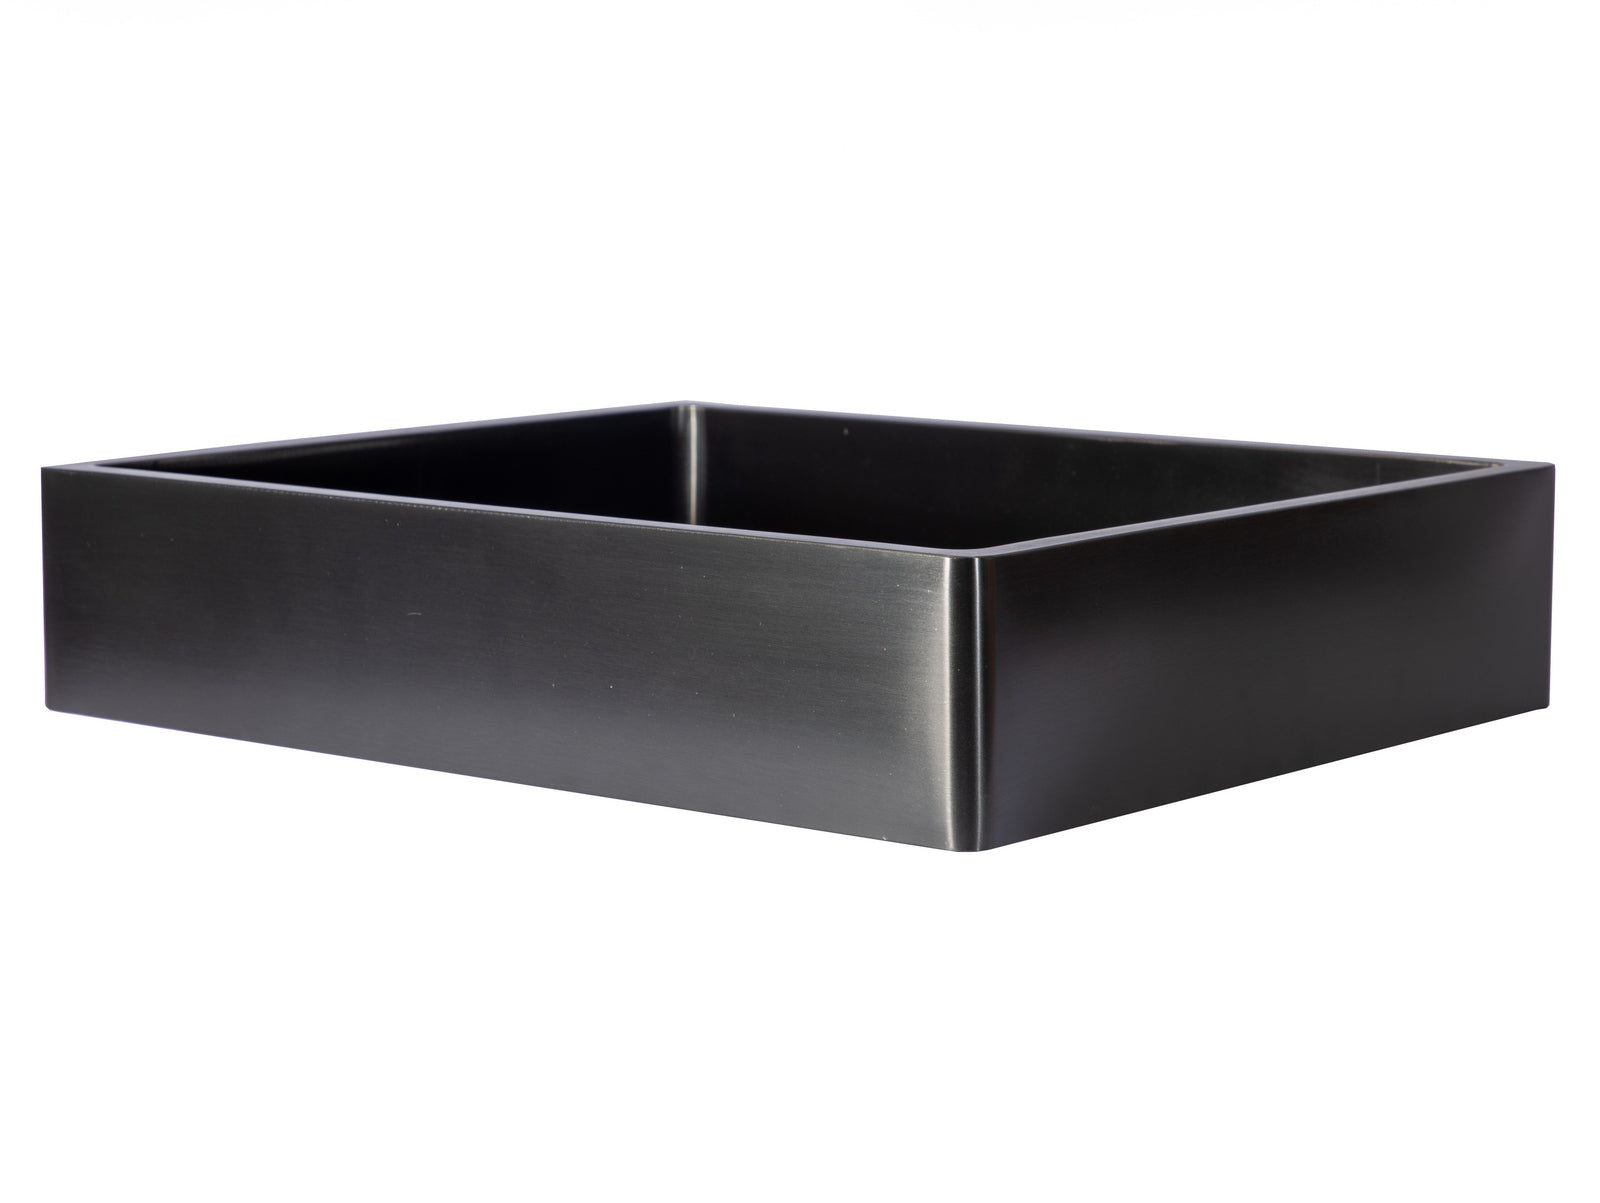 Rectangular 18 3/4 x 15 3/4" Thick Rim Stainless Steel Bathroom Vessel Sink with Drain in Black